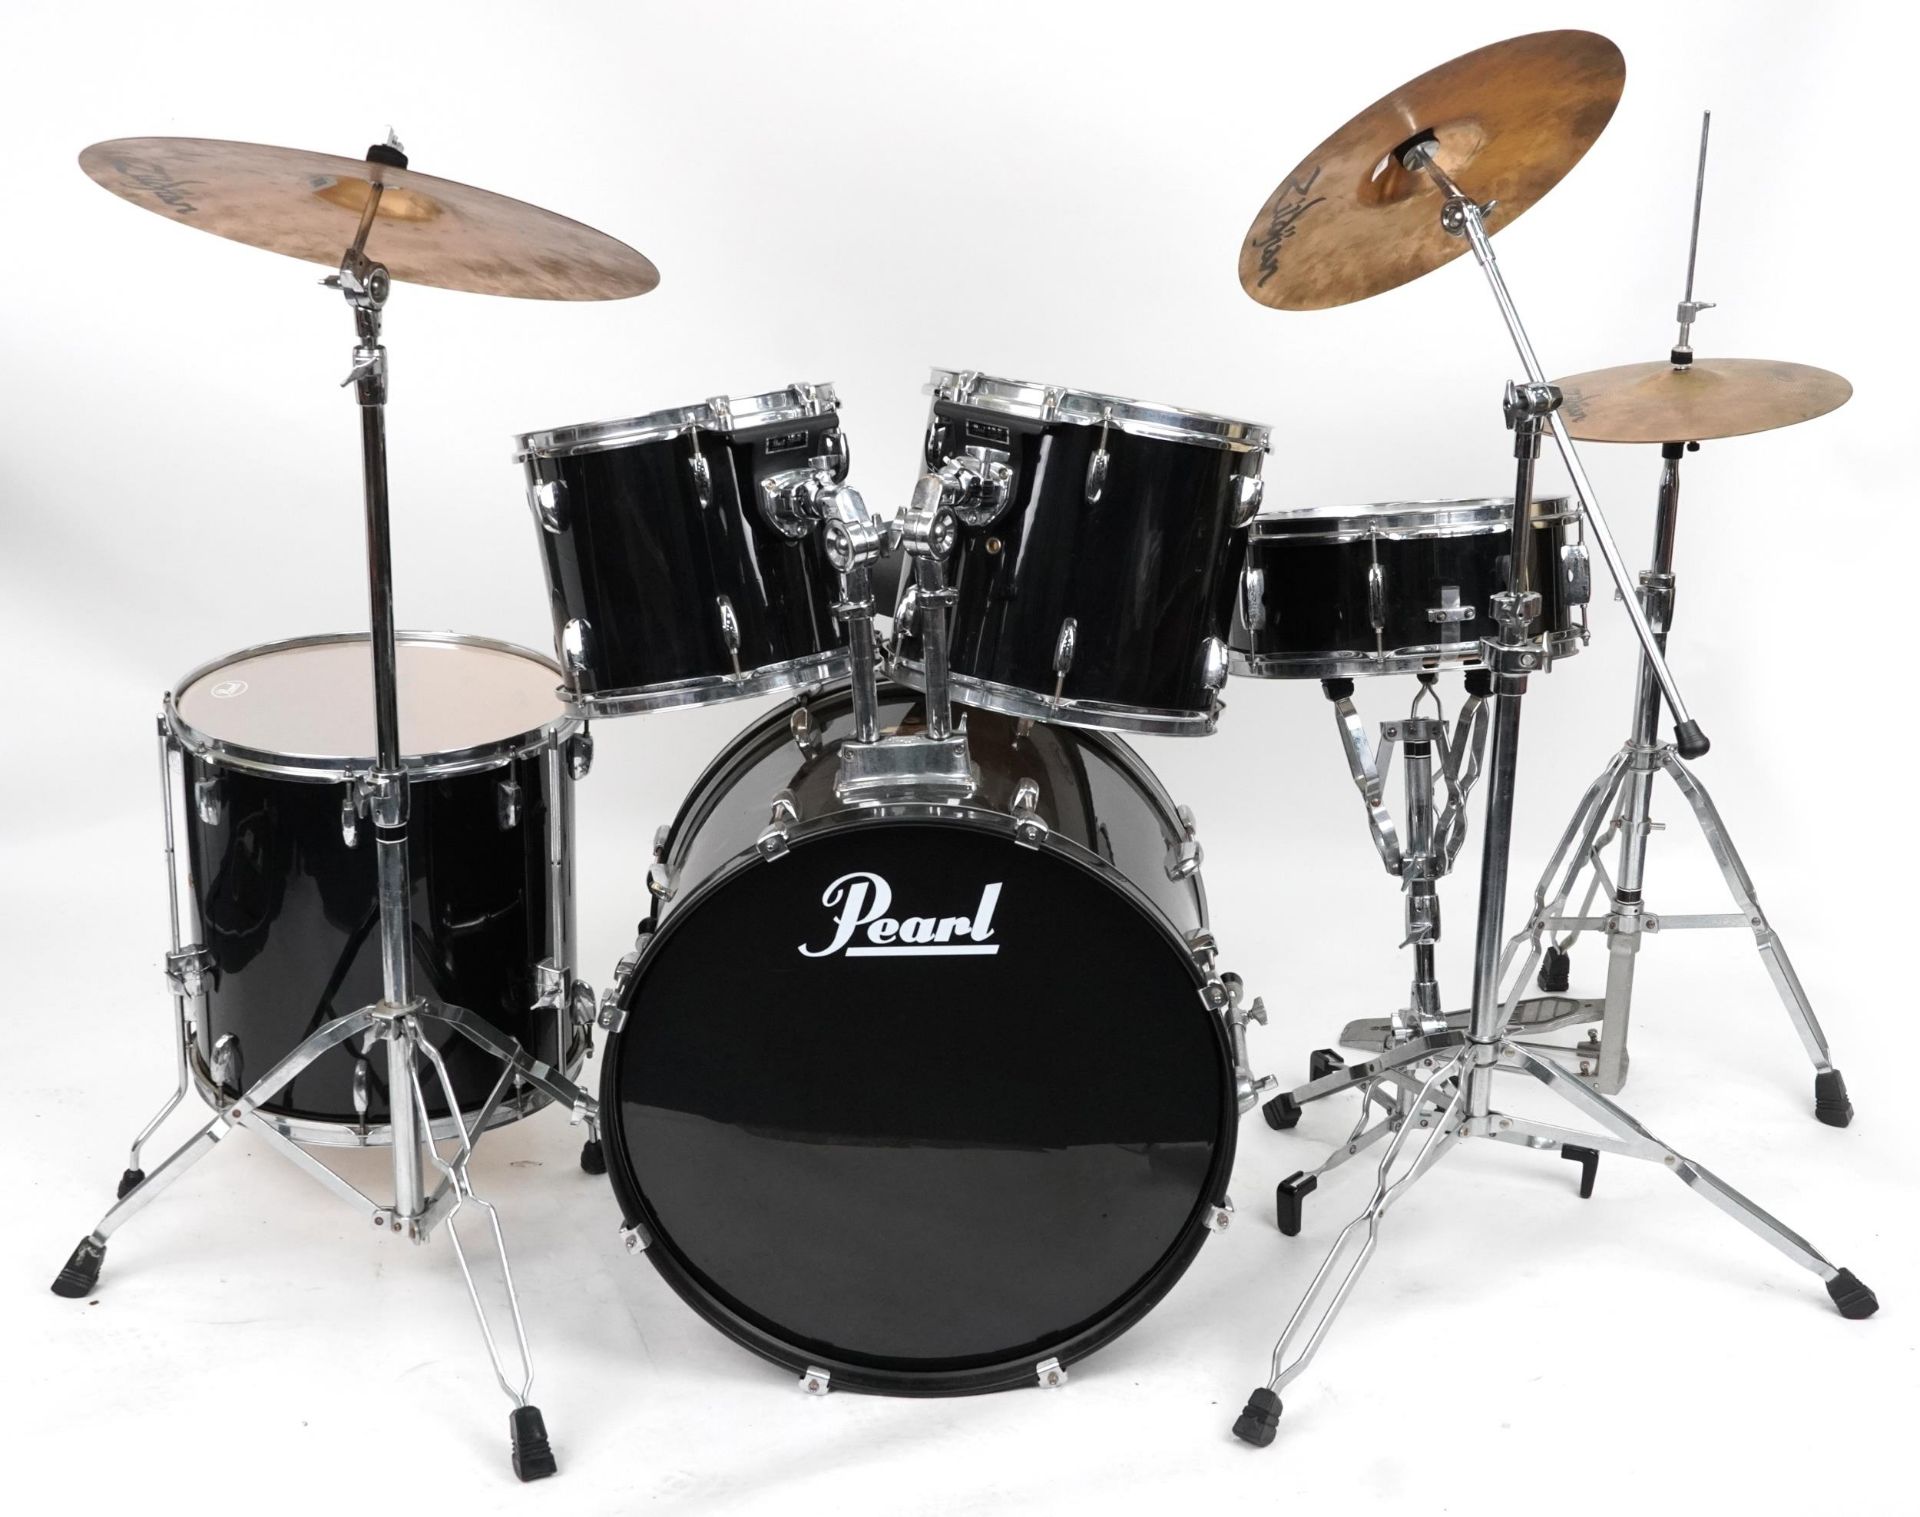 Pearl drum kit with Pearl Speed seat and Zildjian symbols including base drum : For further